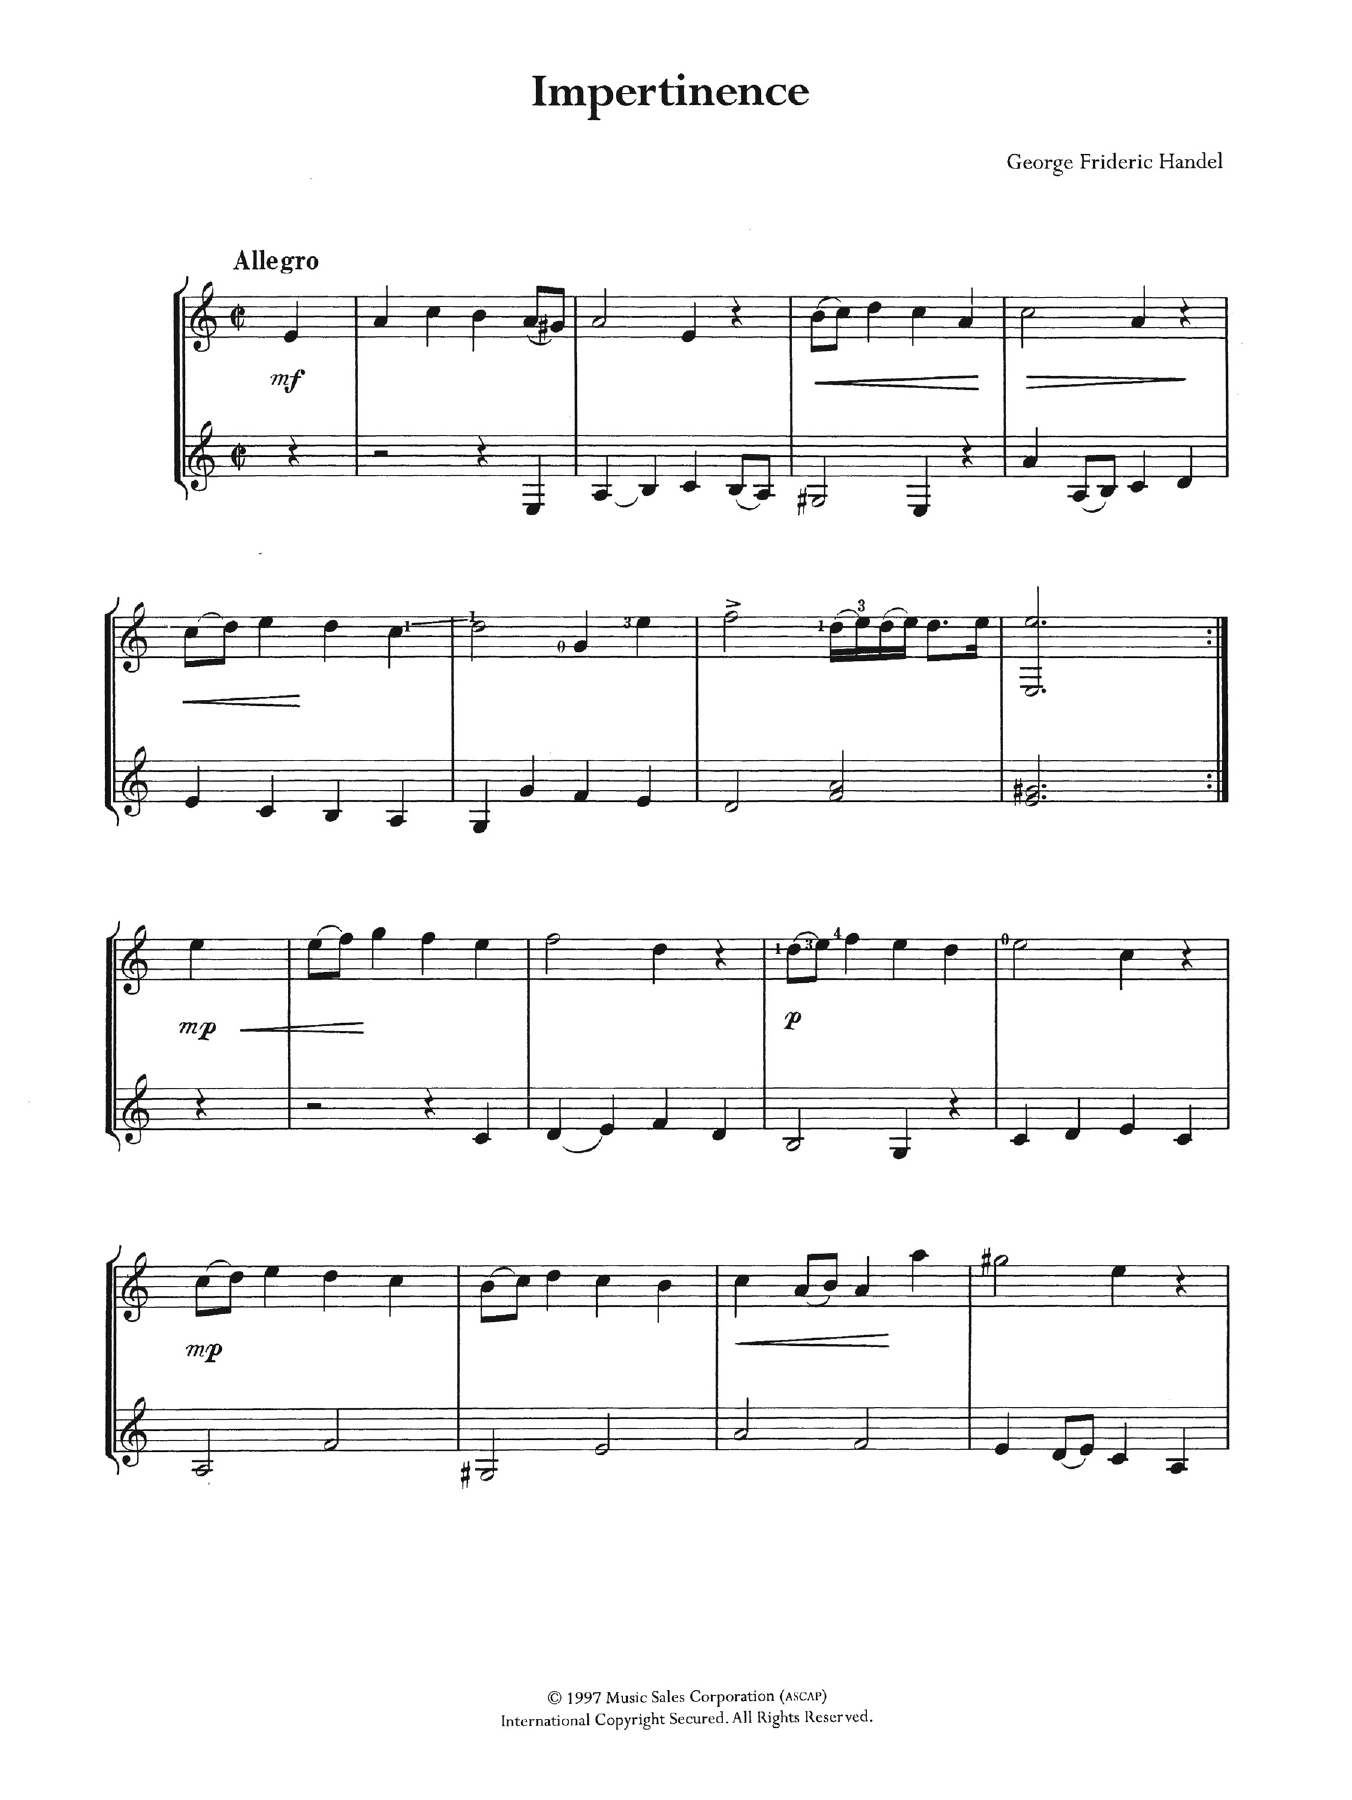 George Frideric Handel Impertinence Sheet Music Download Printable Classical Pdf Score How To Play On Easy Guitar Sku